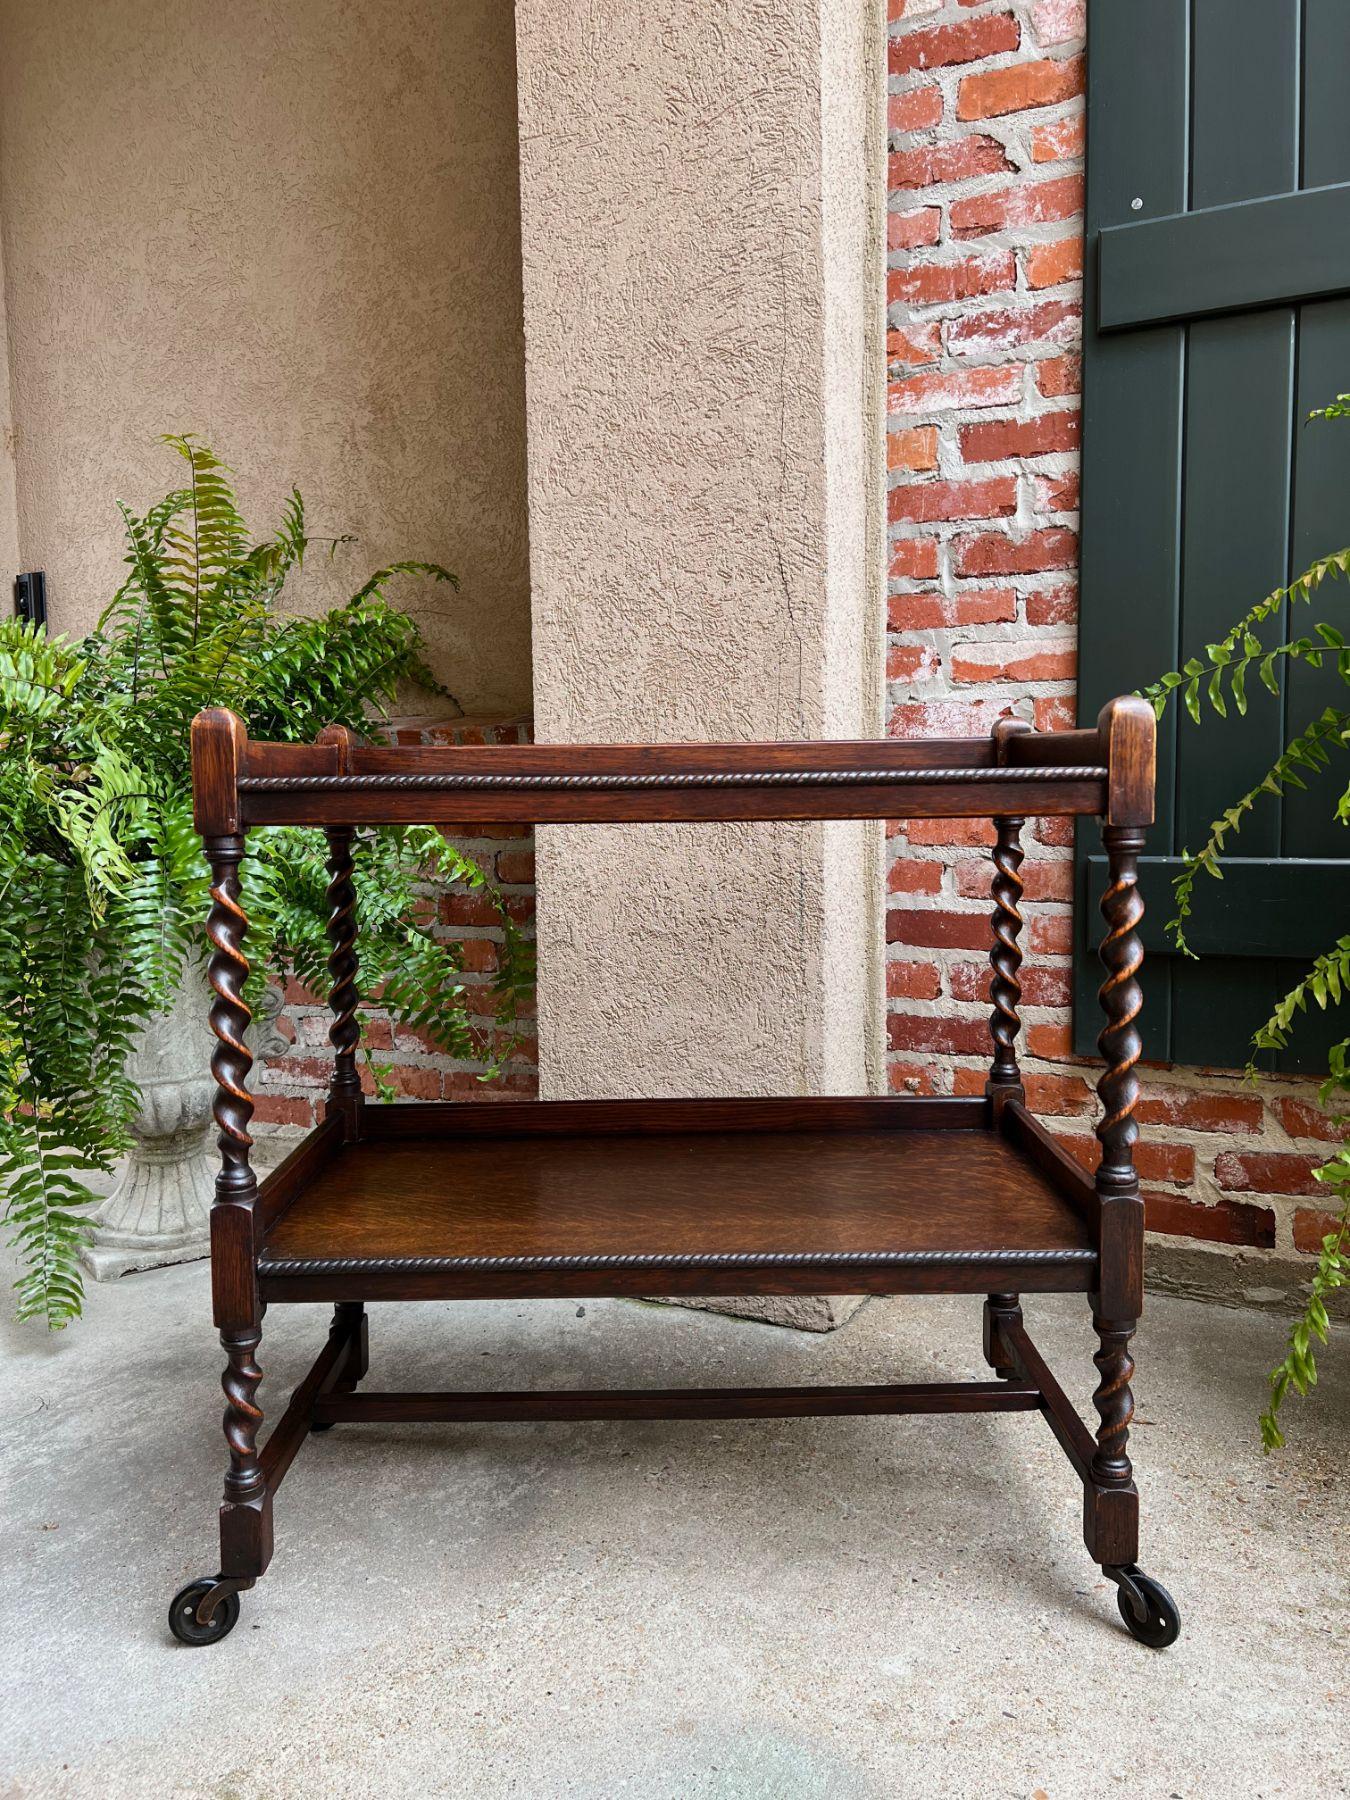 Antique English oak tea trolley drinks wine serving cart barley twist dumbwaiter.

Direct from England, a beautiful antique English oak tea trolley or “dumbwaiter” serving cart.
Excellent for entertaining and great for use as a side table or sofa